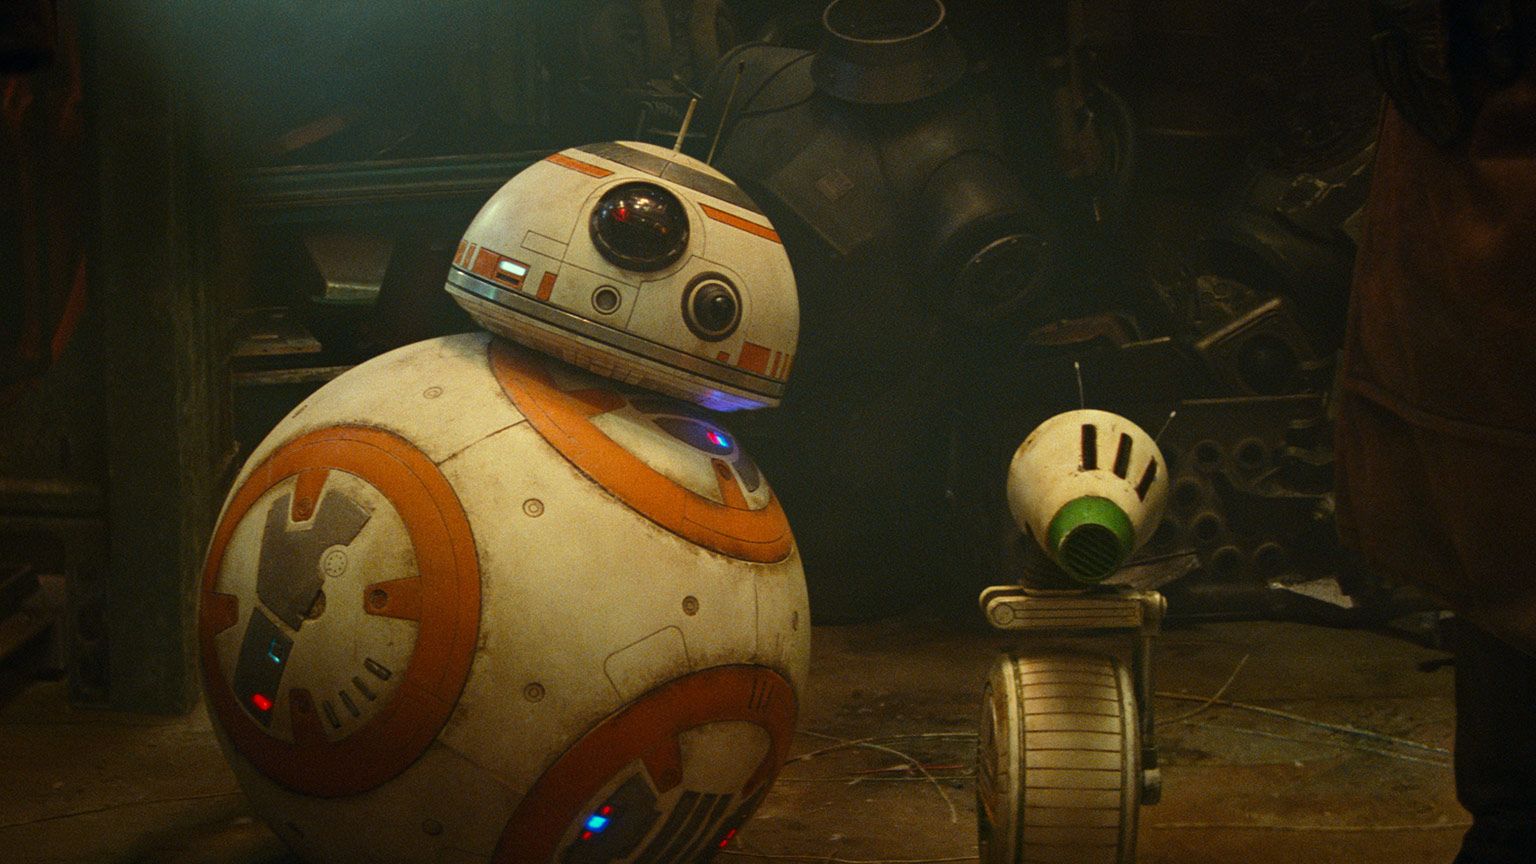 of the Star Wars Galaxy's Greatest Droids